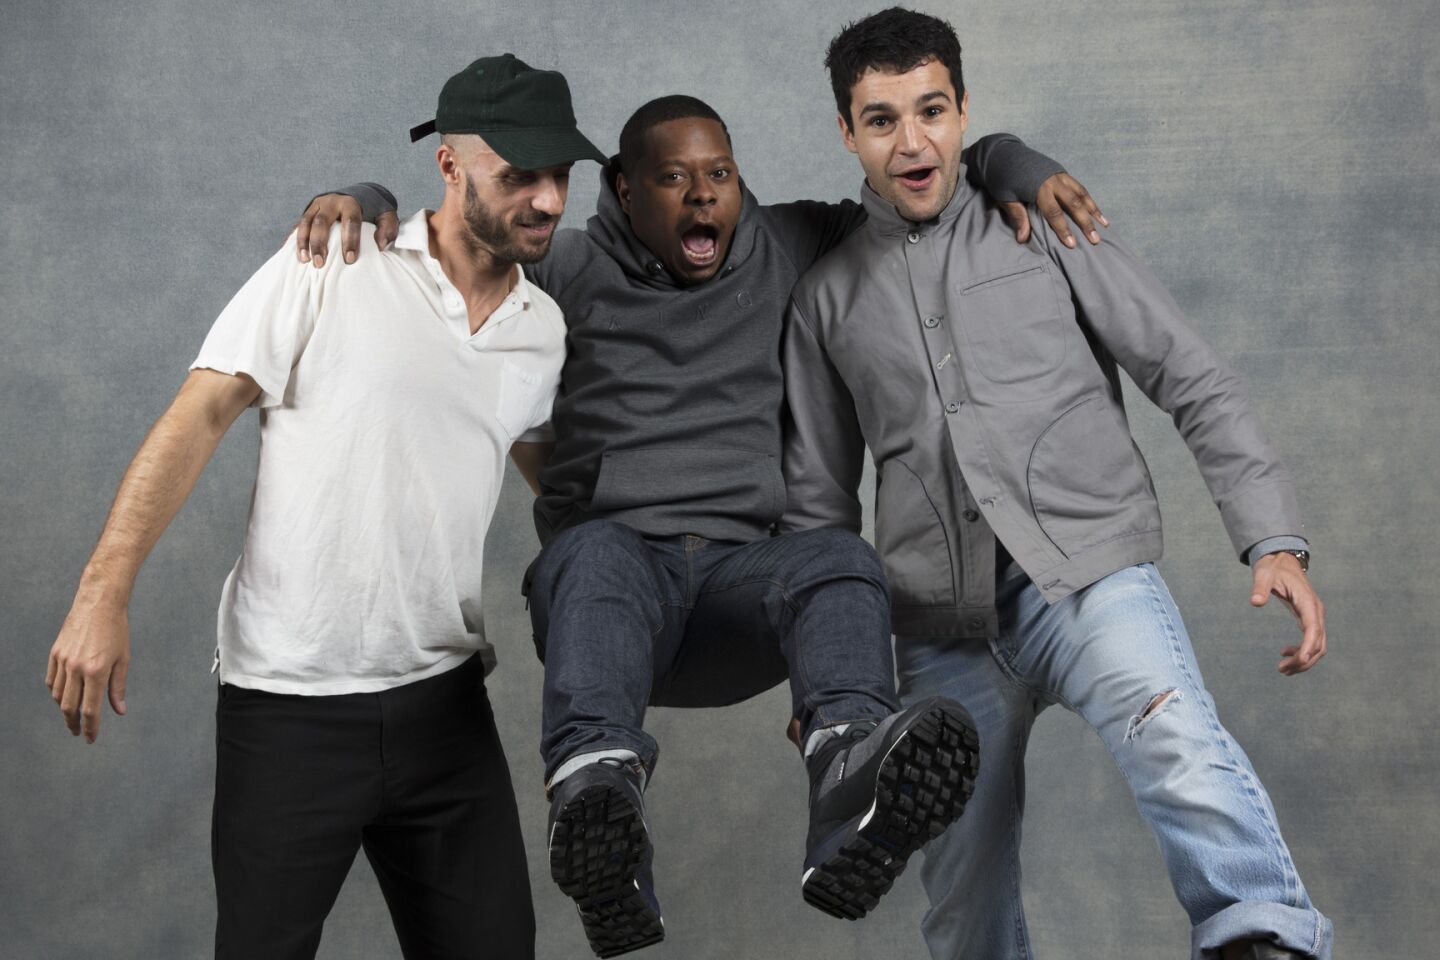 Director Sebastian Silva, from left, and actors Jason Mitchell and Christopher Abbott, from the film, "Tyrel," photographed in the L.A. Times Studio during the Sundance Film Festival in Park City, Utah, Jan. 20, 2018.